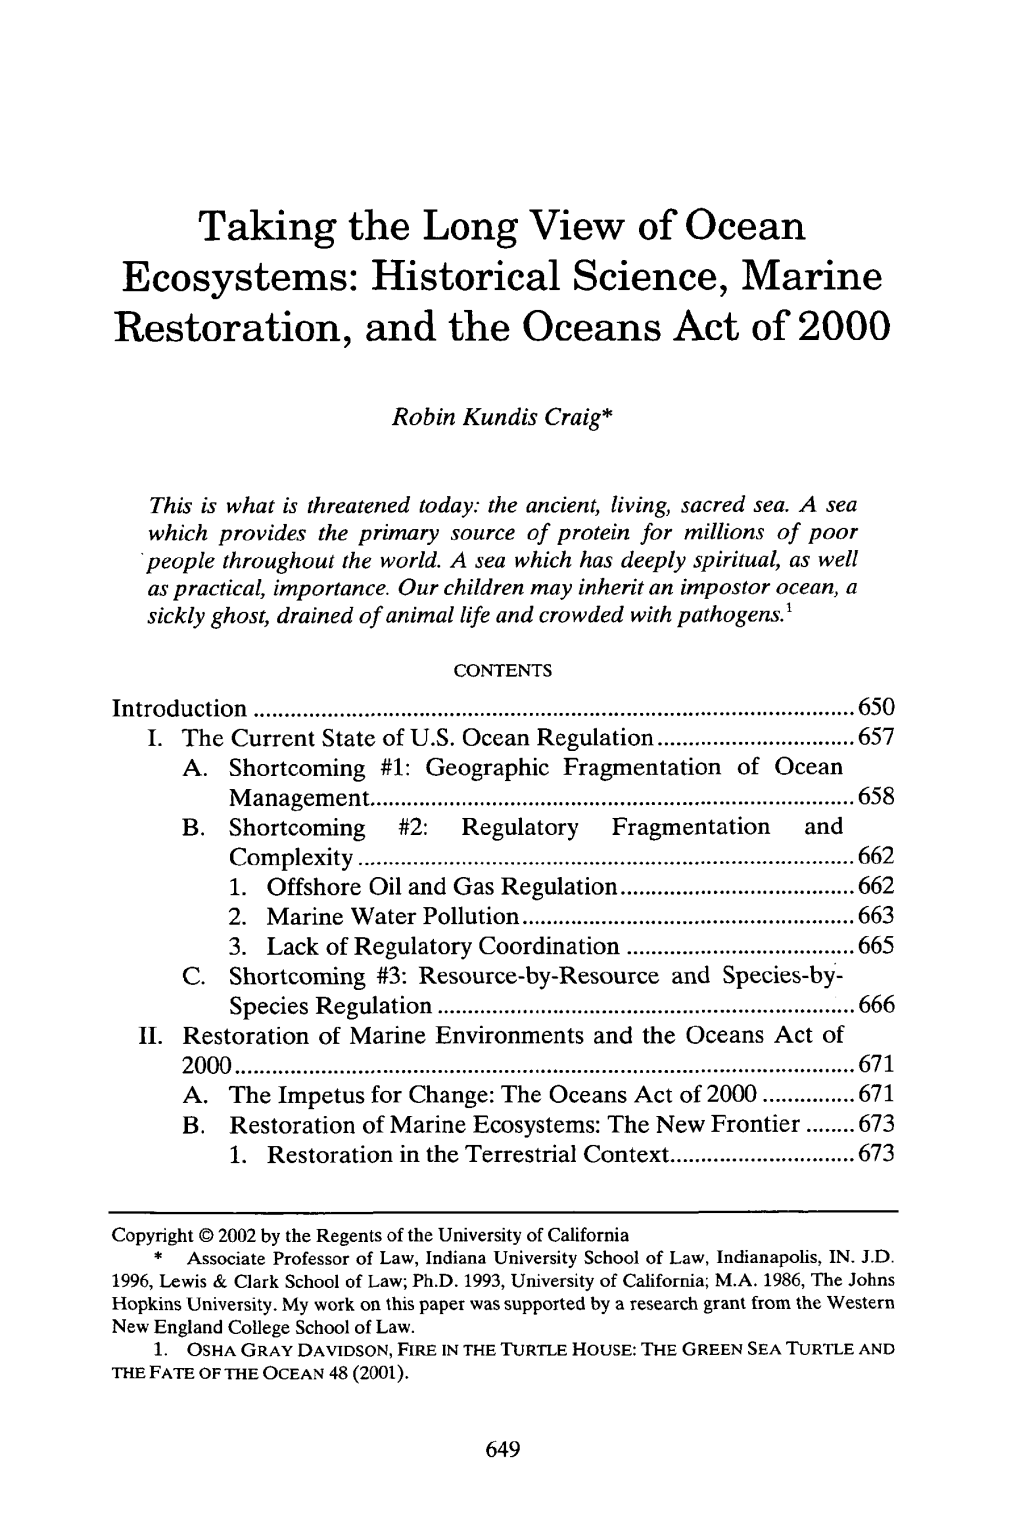 Historical Science, Marine Restoration, and the Oceans Act of 2000